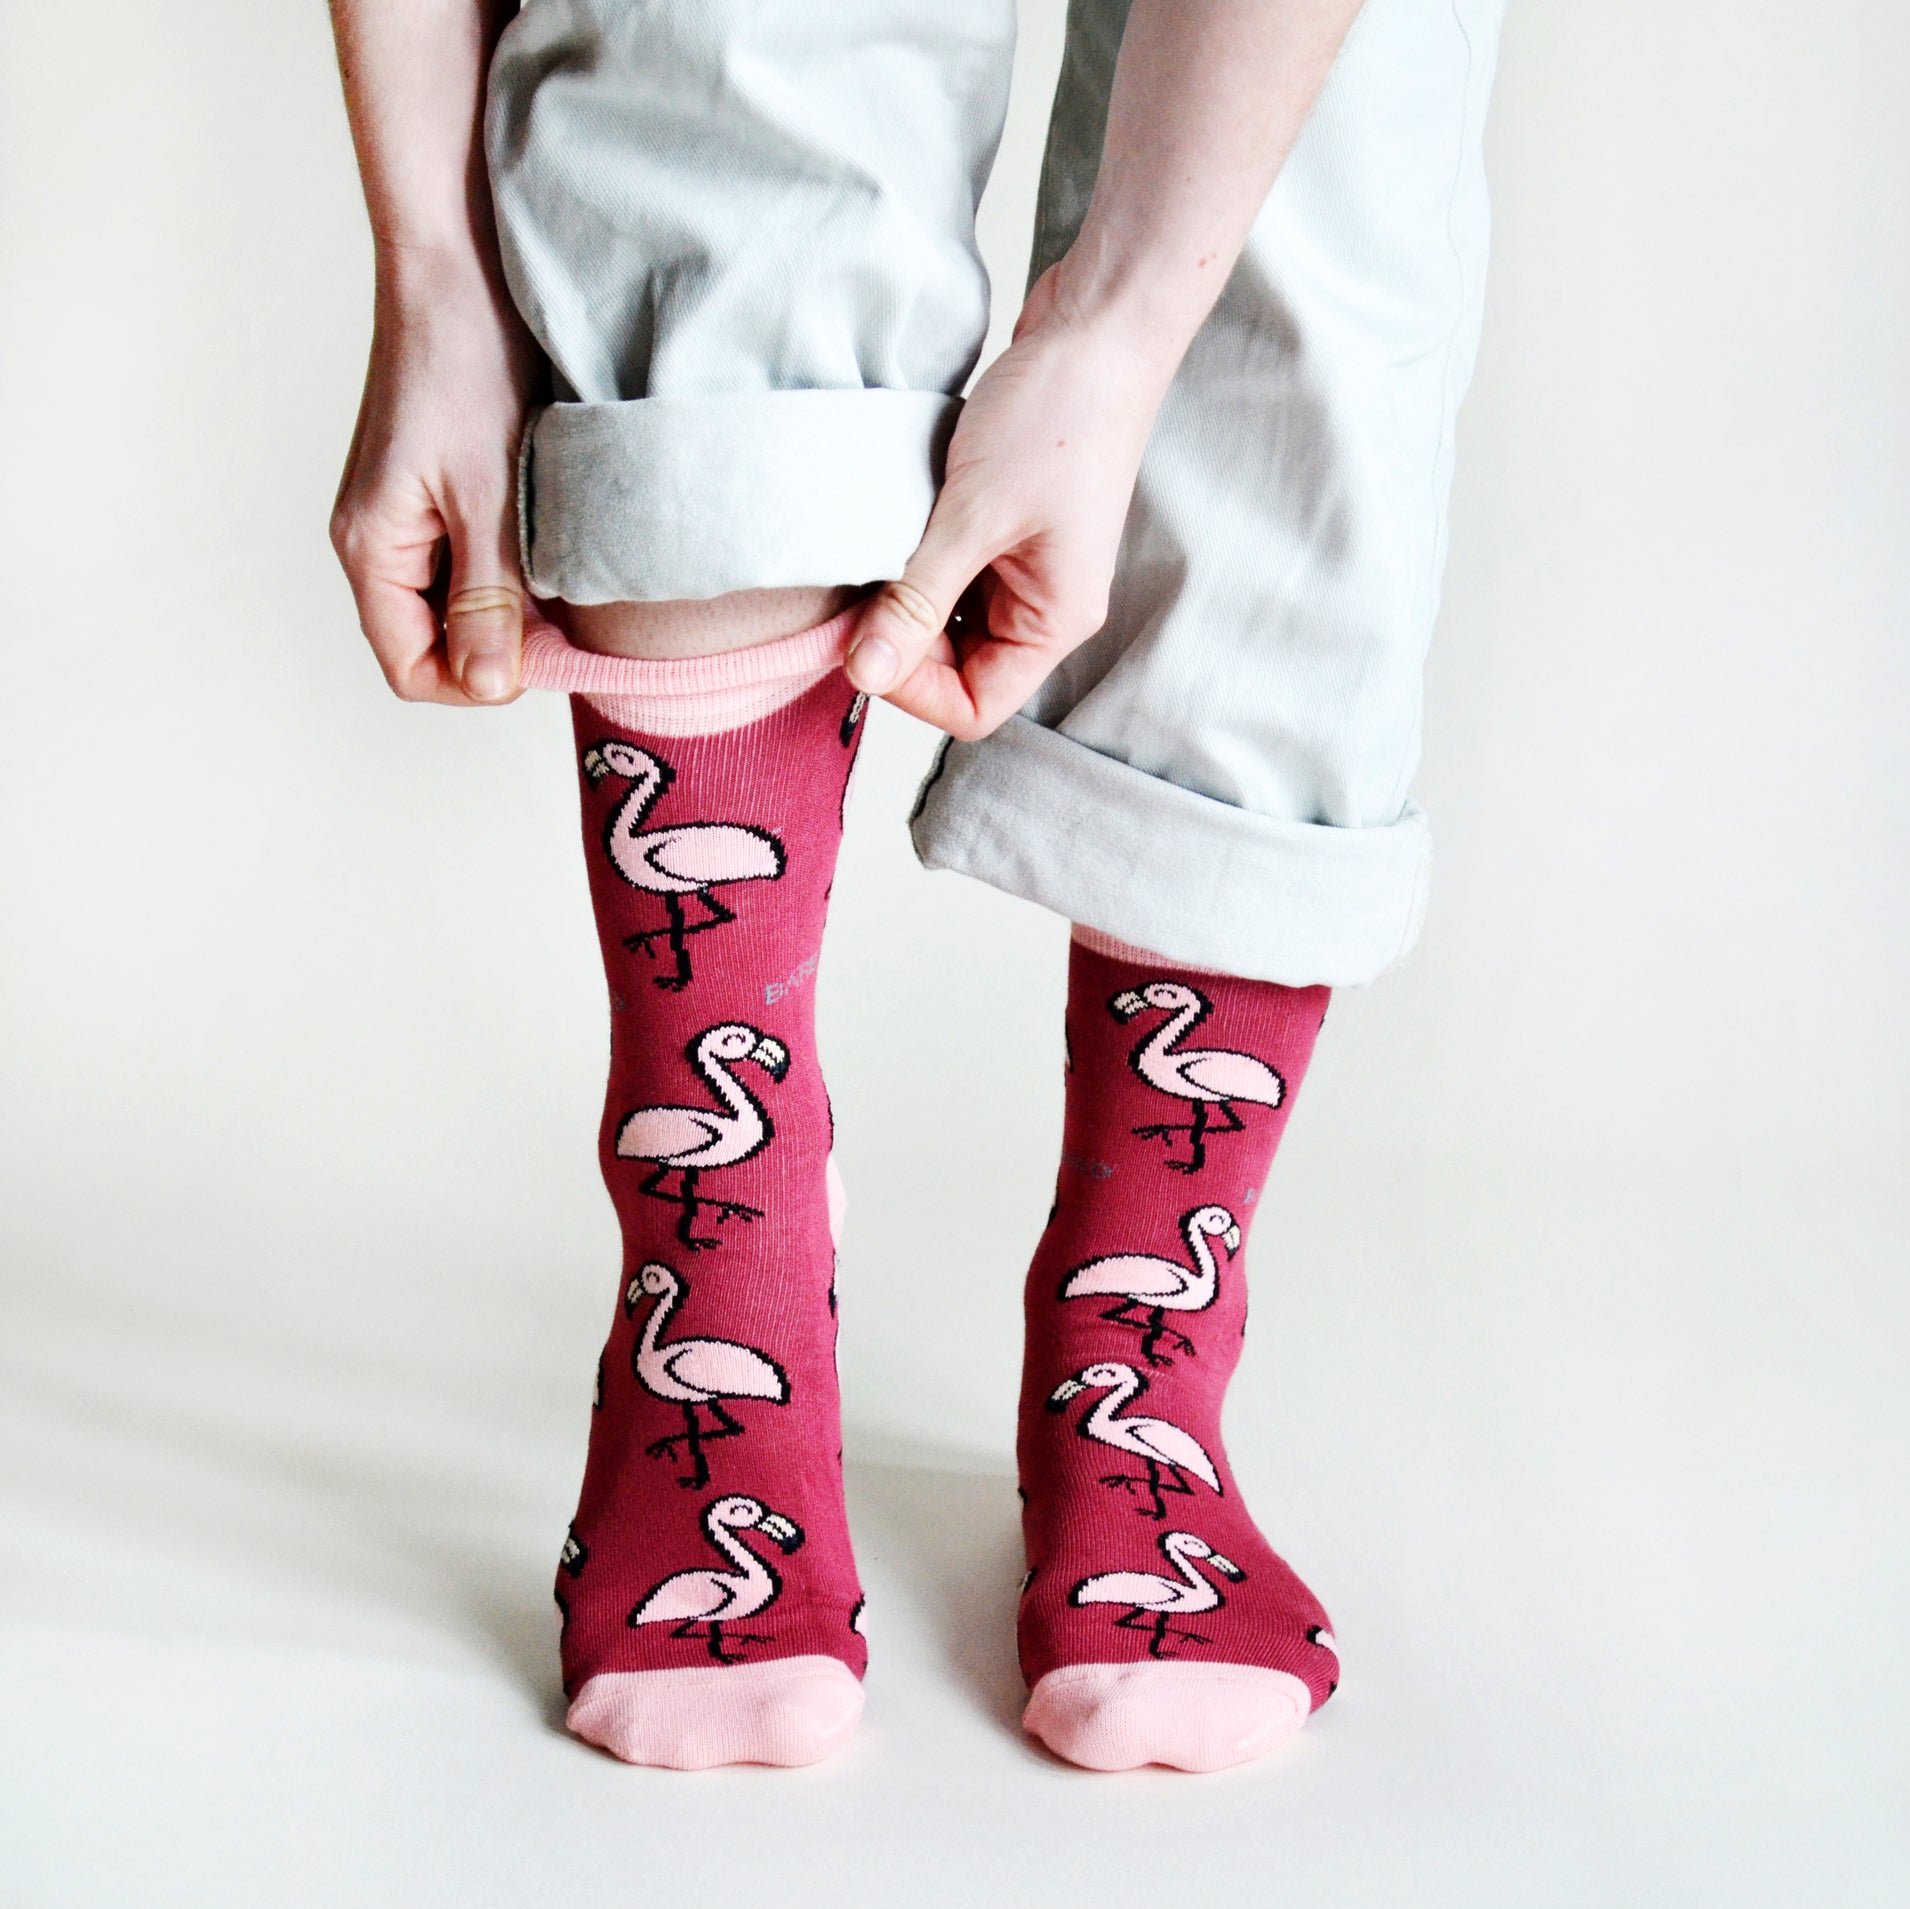 standing model wearing hot pink flamingo socks, pulling right cuff up, front view